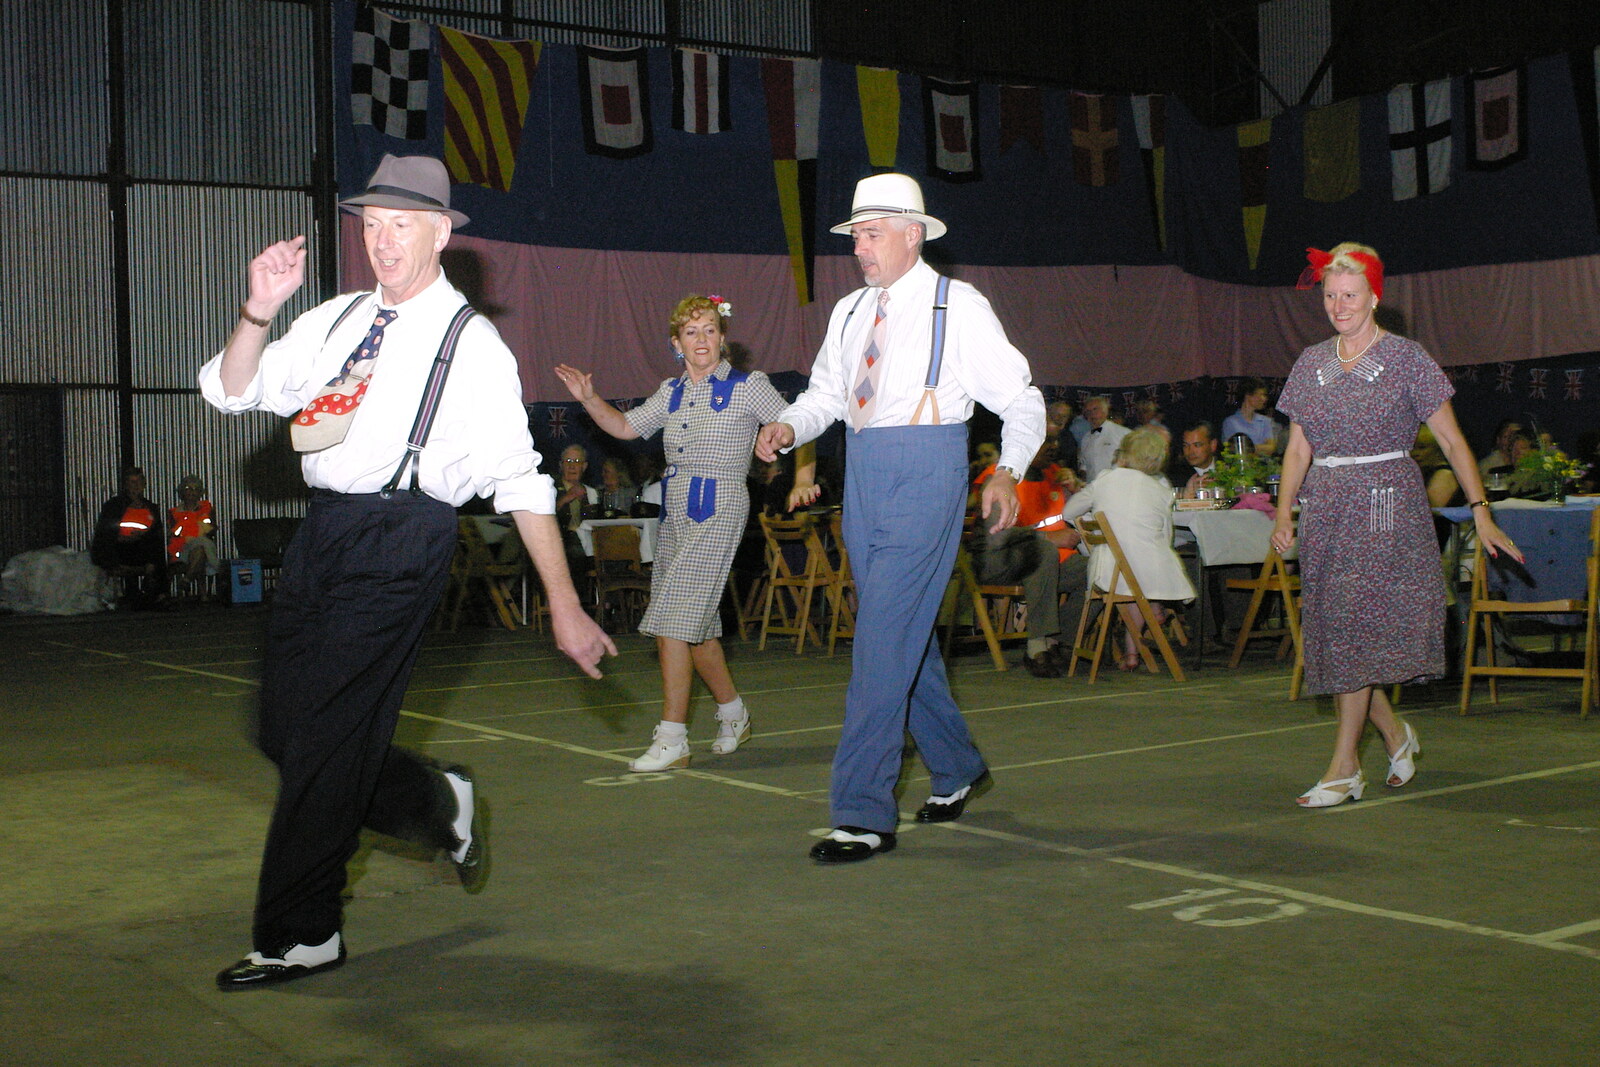 Somesort of 1940s line dancing from Another 1940s Dance, Ellough Airfield, Beccles, Suffolk - 24th June 2005